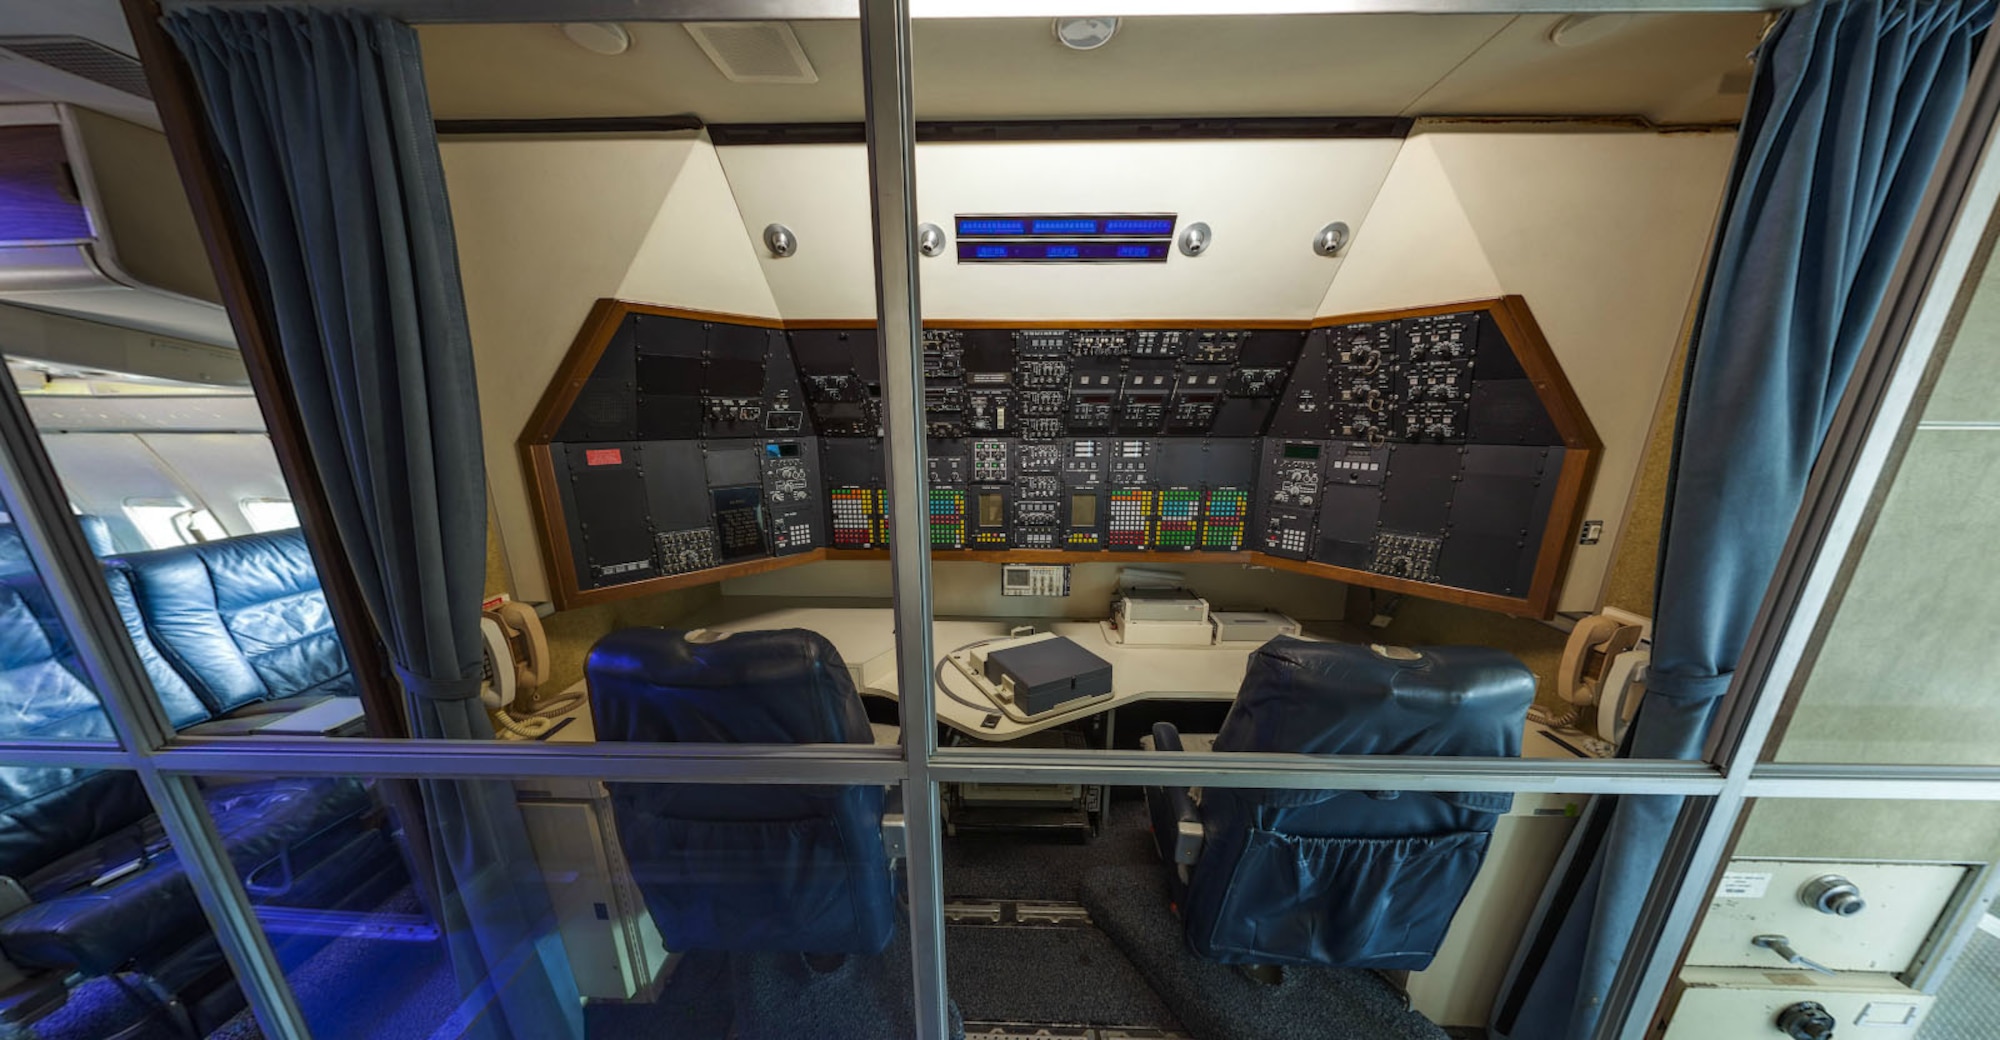 DAYTON, Ohio -- Communications station of Boeing VC-137C SAM 26000 (Air Force One) at the National Museum of the U.S. Air Force. This photo is part of the free ACI Cockpit360º app, which features high-definition panoramic photos of more than 20 cockpits from many well-known aircraft on display at the National Museum of the U.S. Air Force. (Photo courtesy of Lyle Jansma, Aerocapture Images)